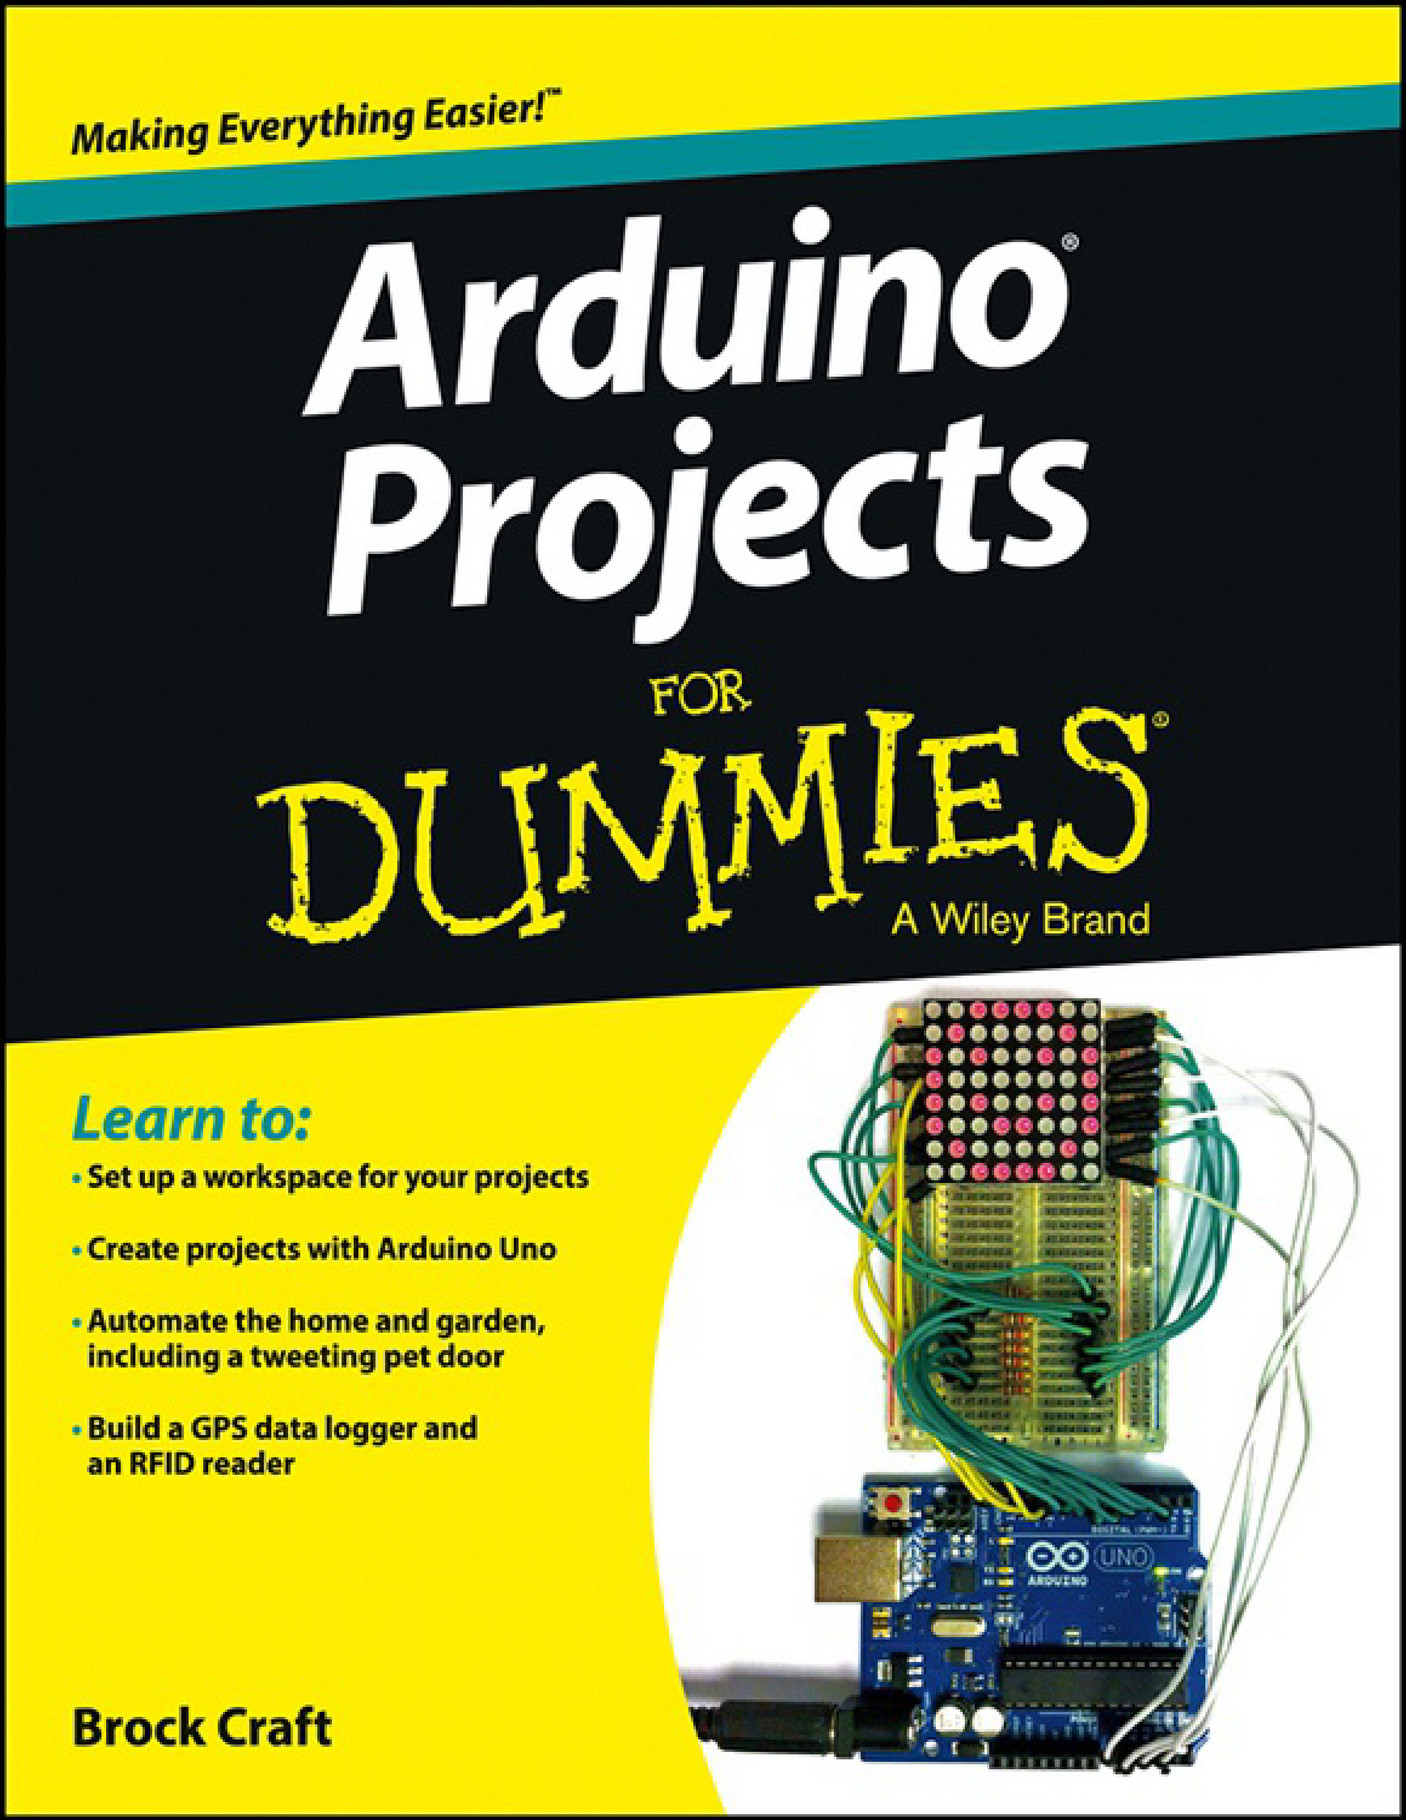 Revistas - Arduino Projects for Dummies - Page 1 - Created with ...